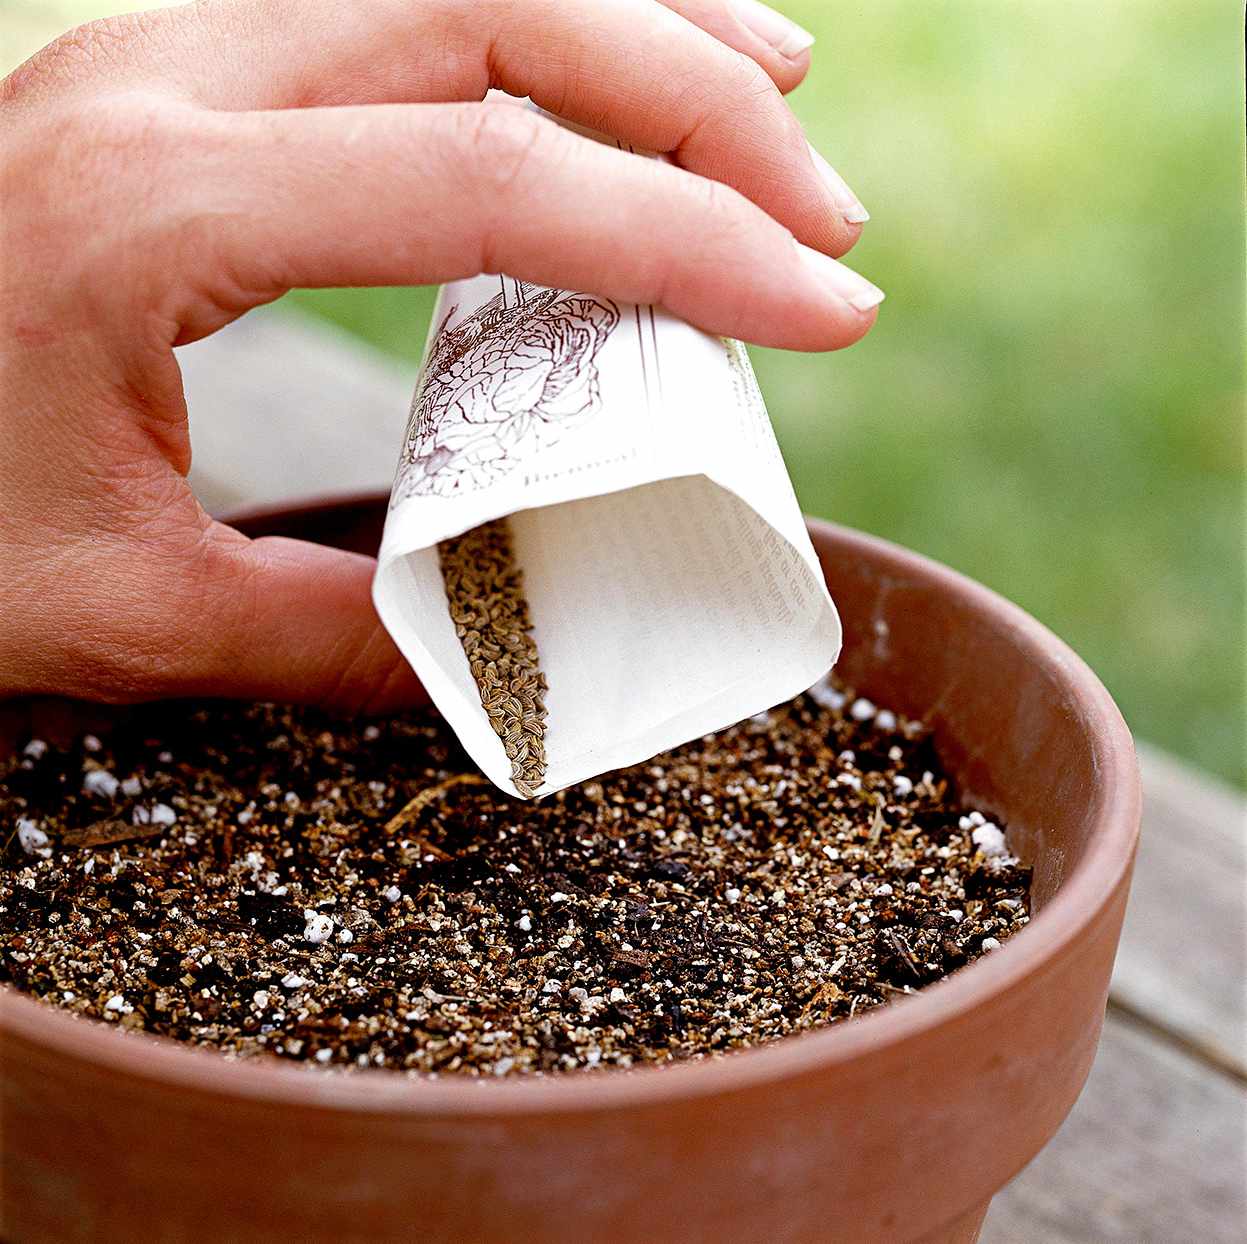 Person pouring seeds into soil